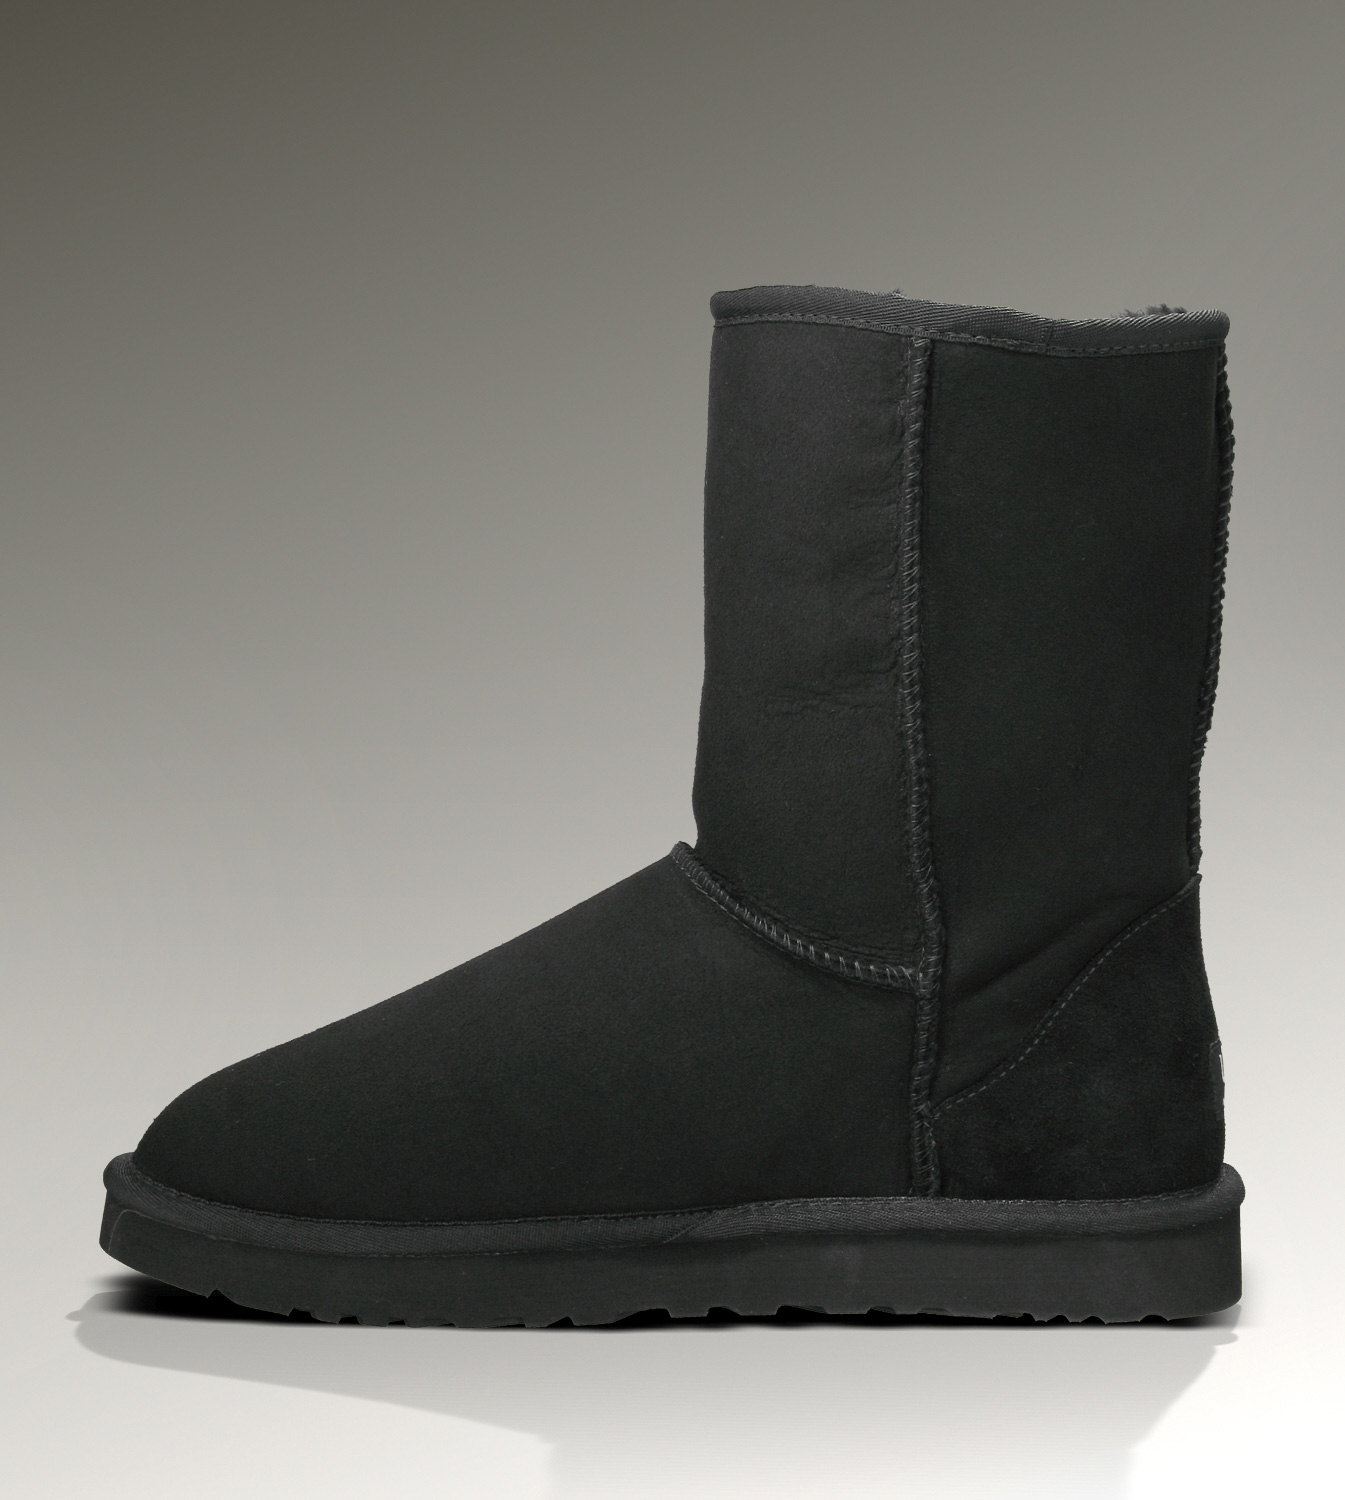 Ugg Outlet Classic Short Black Boots 140257